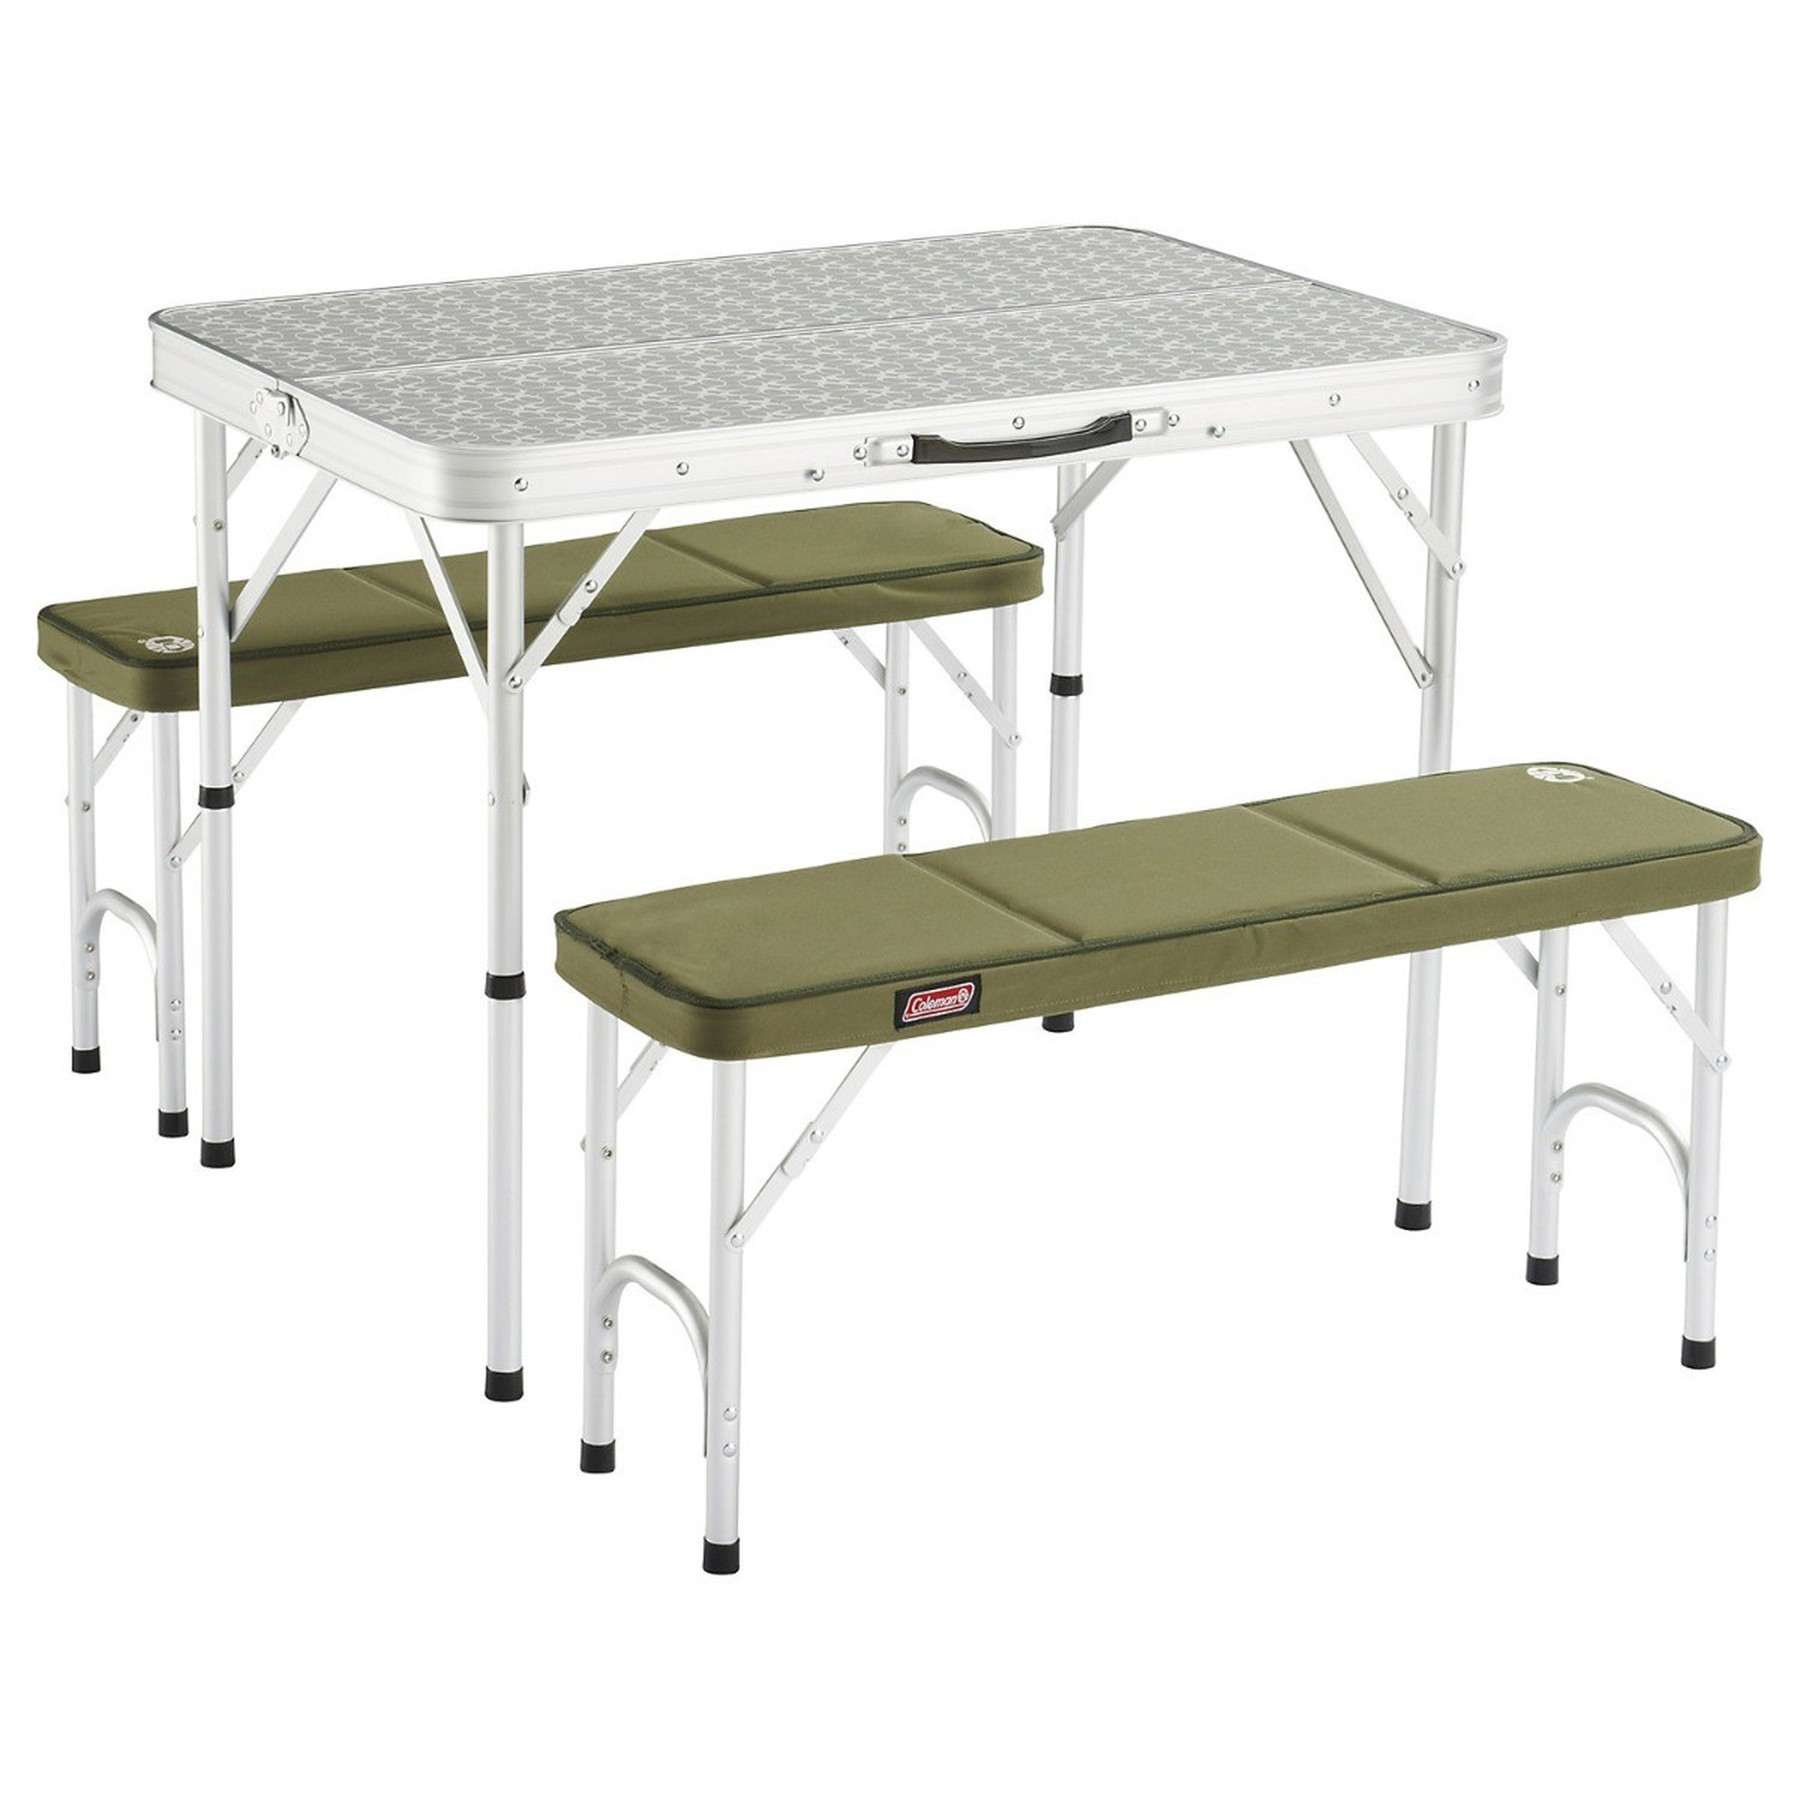 A metal pack-away table with two benches big enough for two people each.